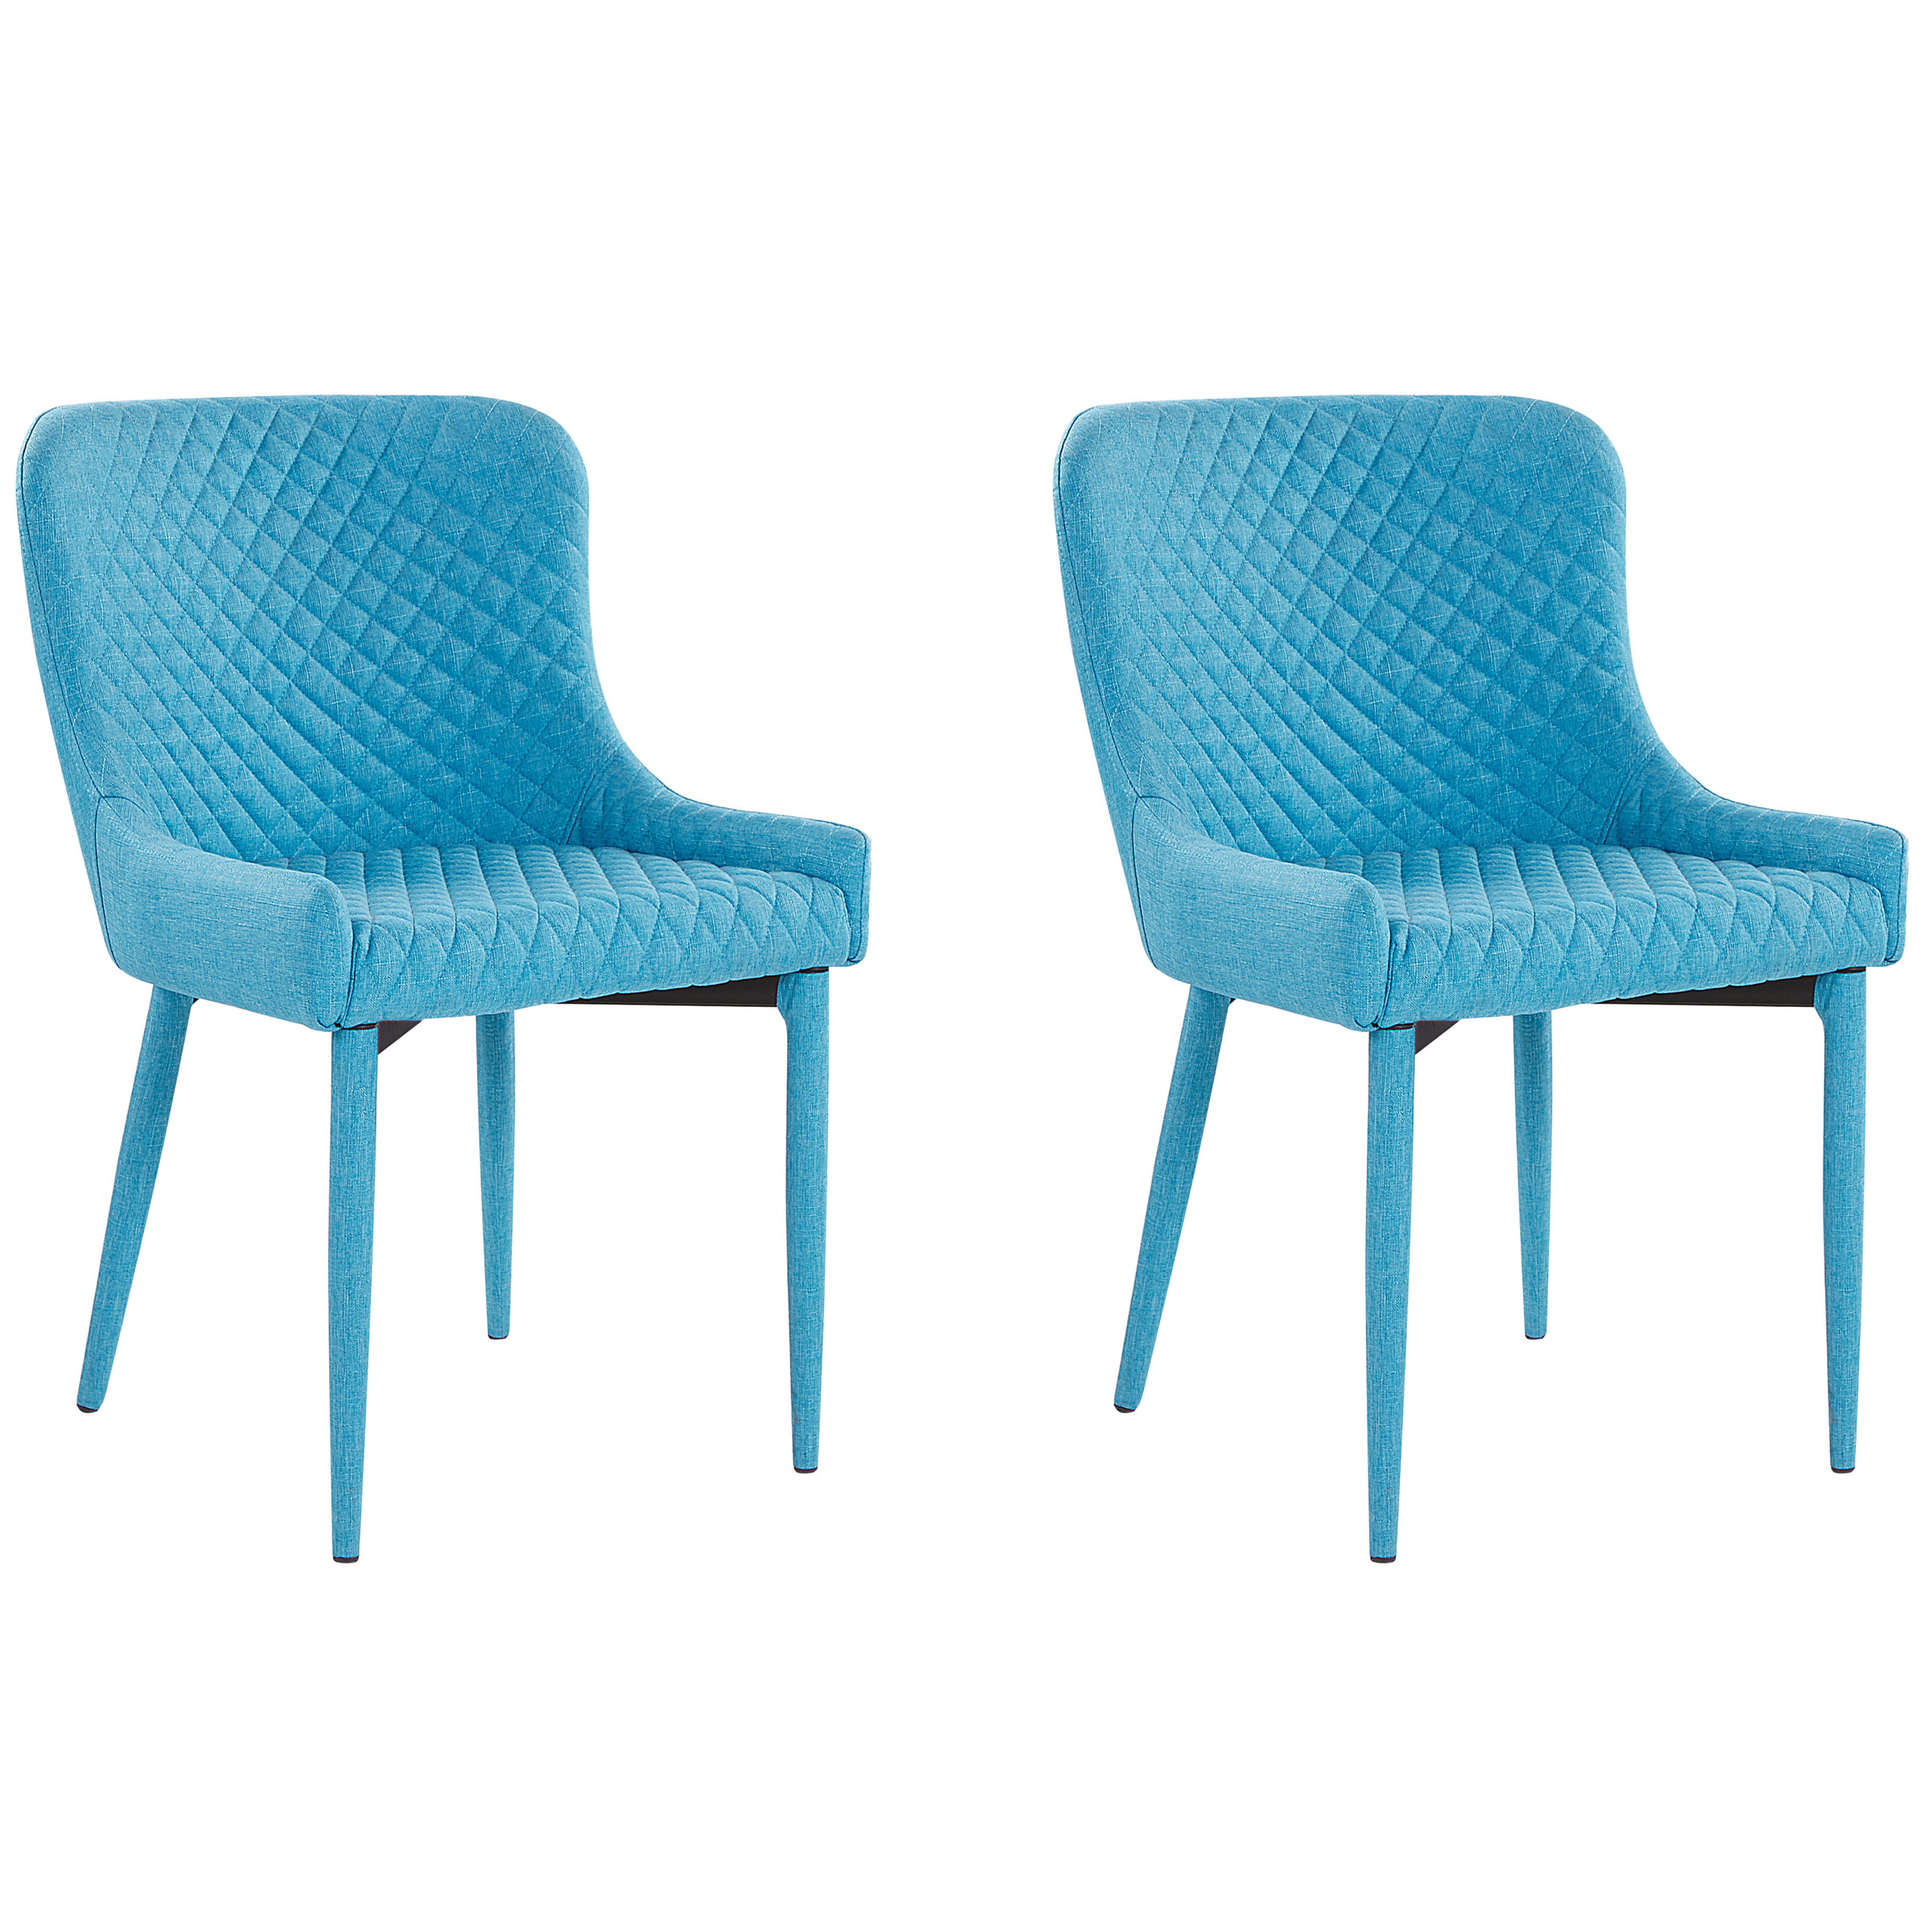 Beliani Set of 2 Dining Chairs Blue Fabric Upholstery Glam Eclectic Style